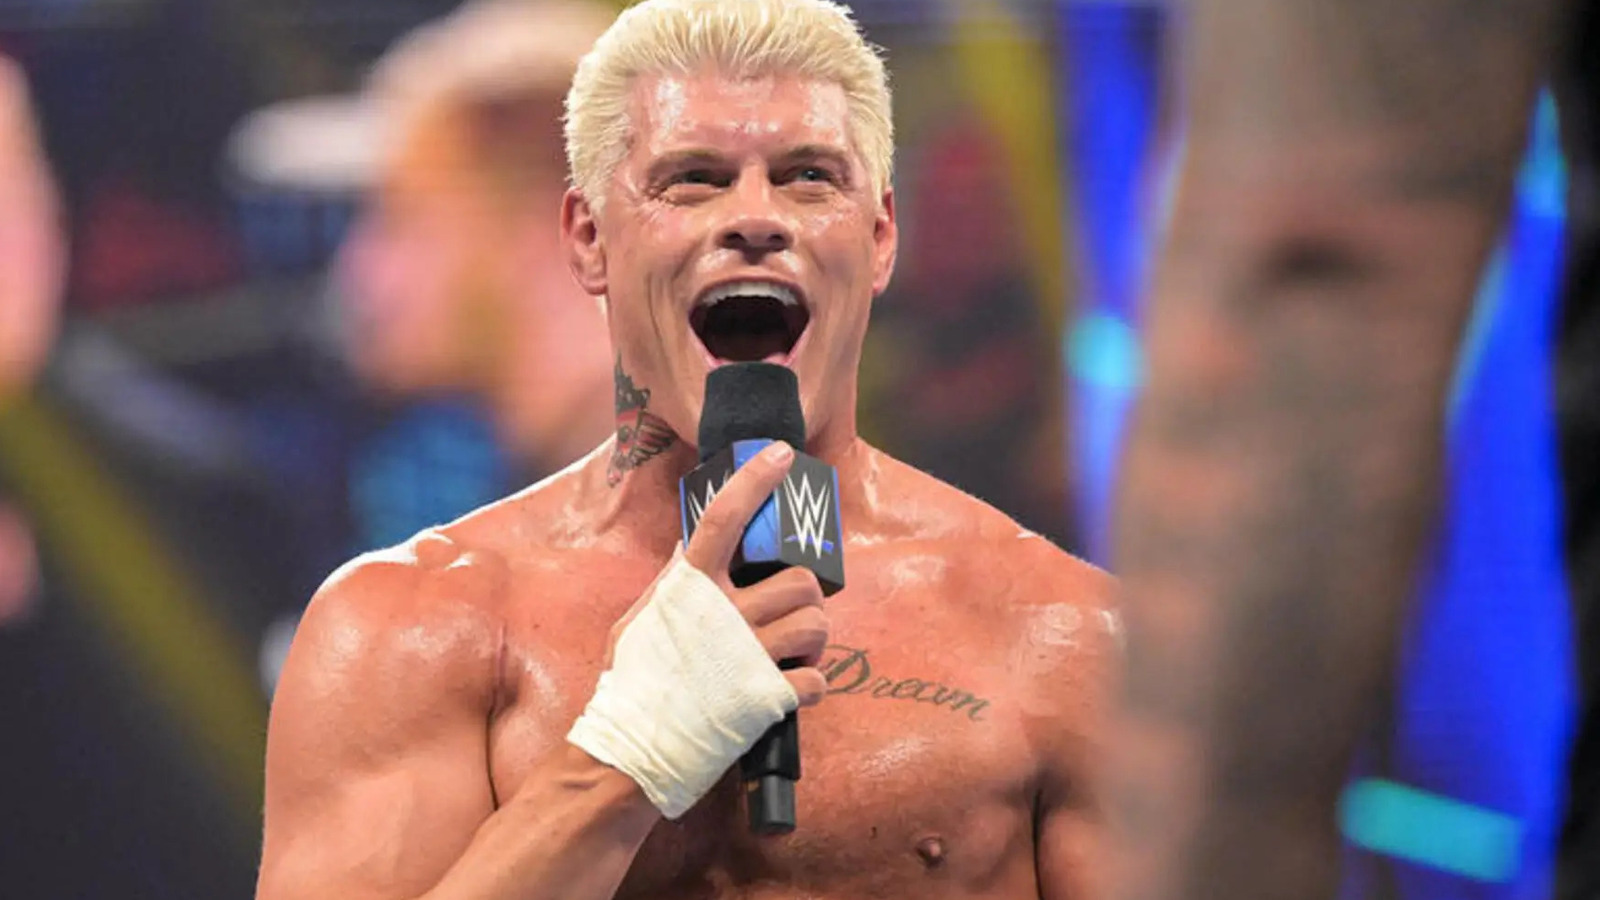 WWE's Cody Rhodes Reportedly Among Fanatics' Top 10 Overall Sports Merchandise Sellers